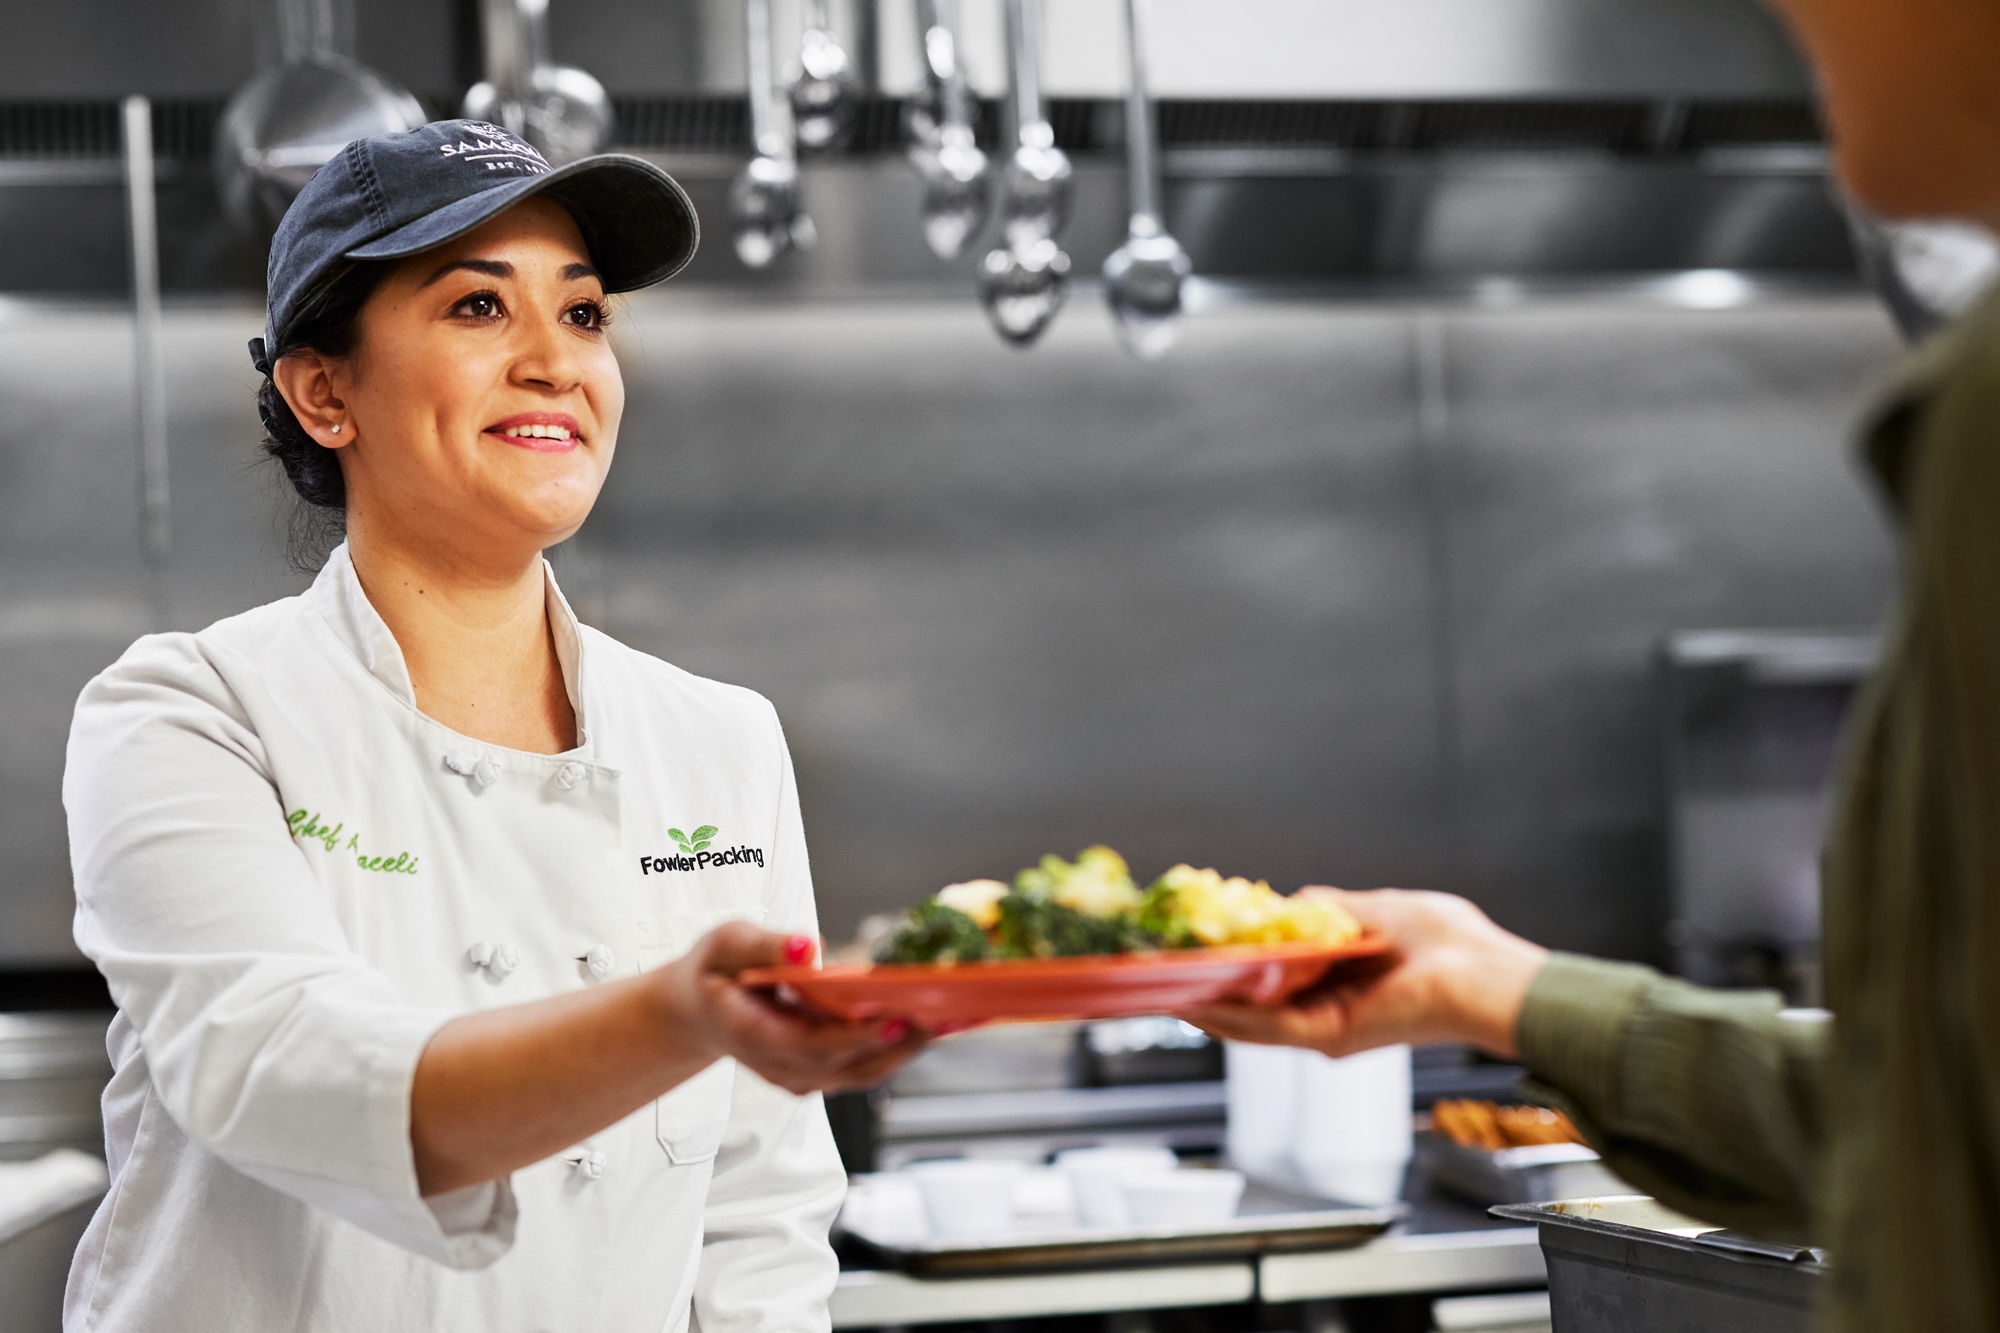 A female chef is wearing a chef apron and a navy cap is handing a plate of food to someone in a kitchen